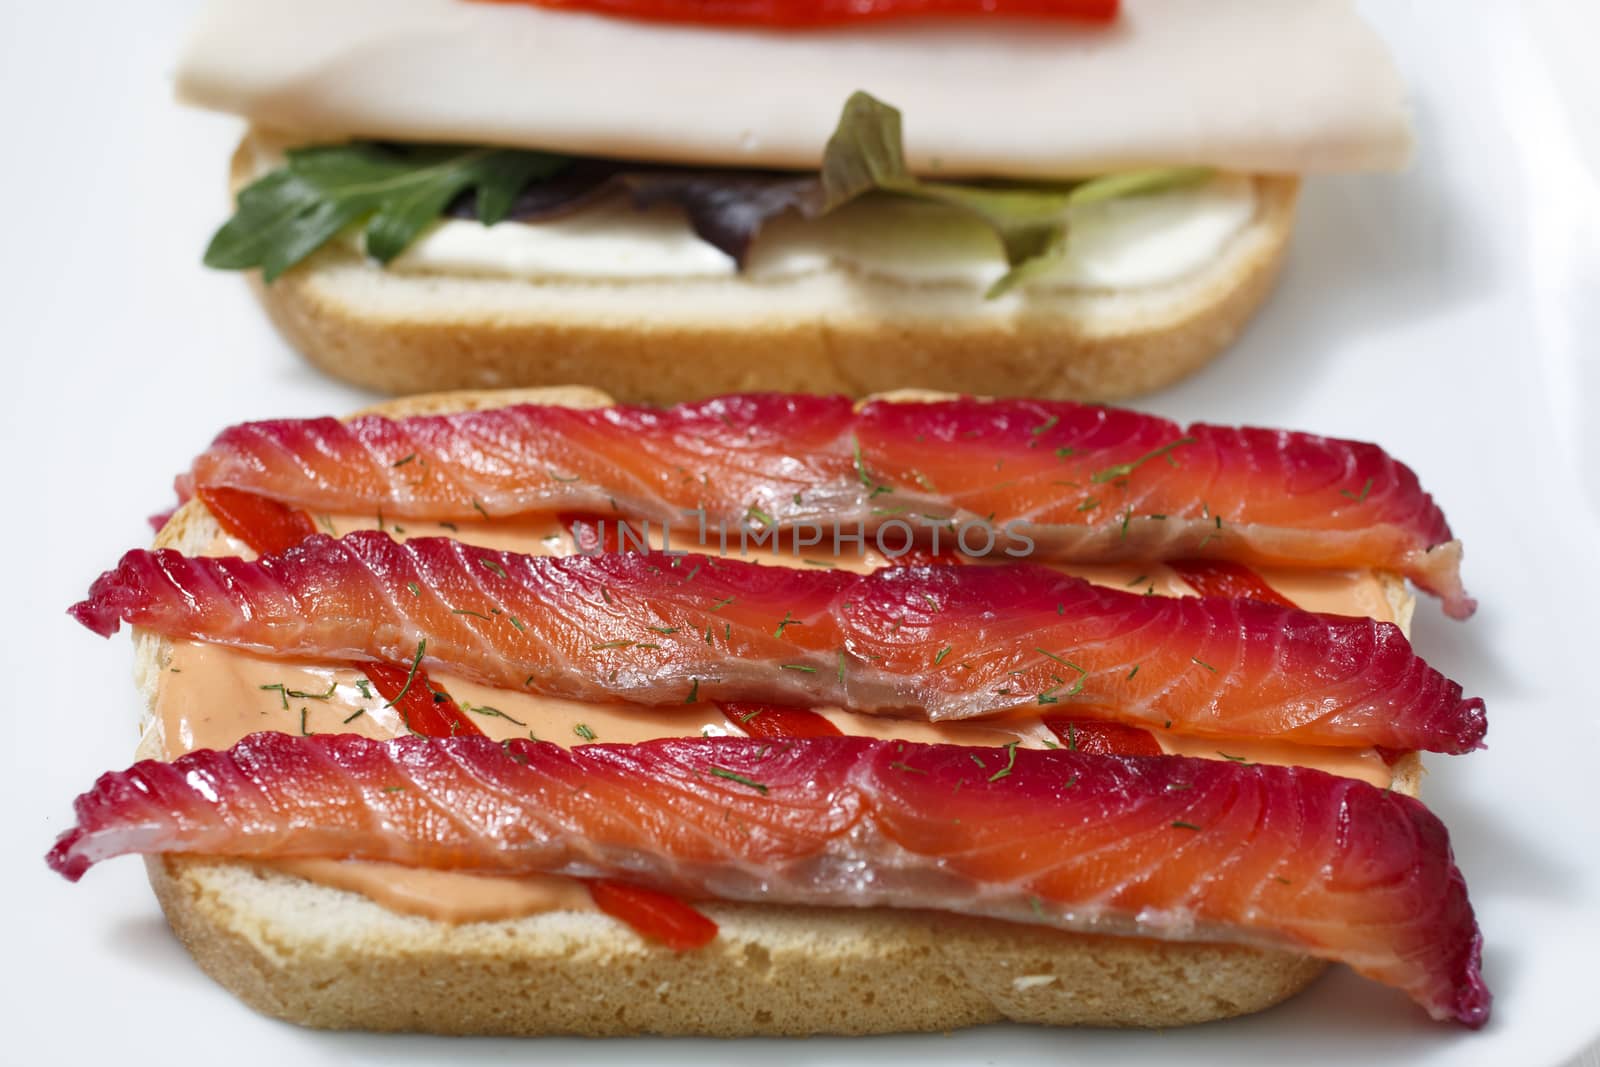 Delicious sandwich with gravlax, turkey and green vegetables.